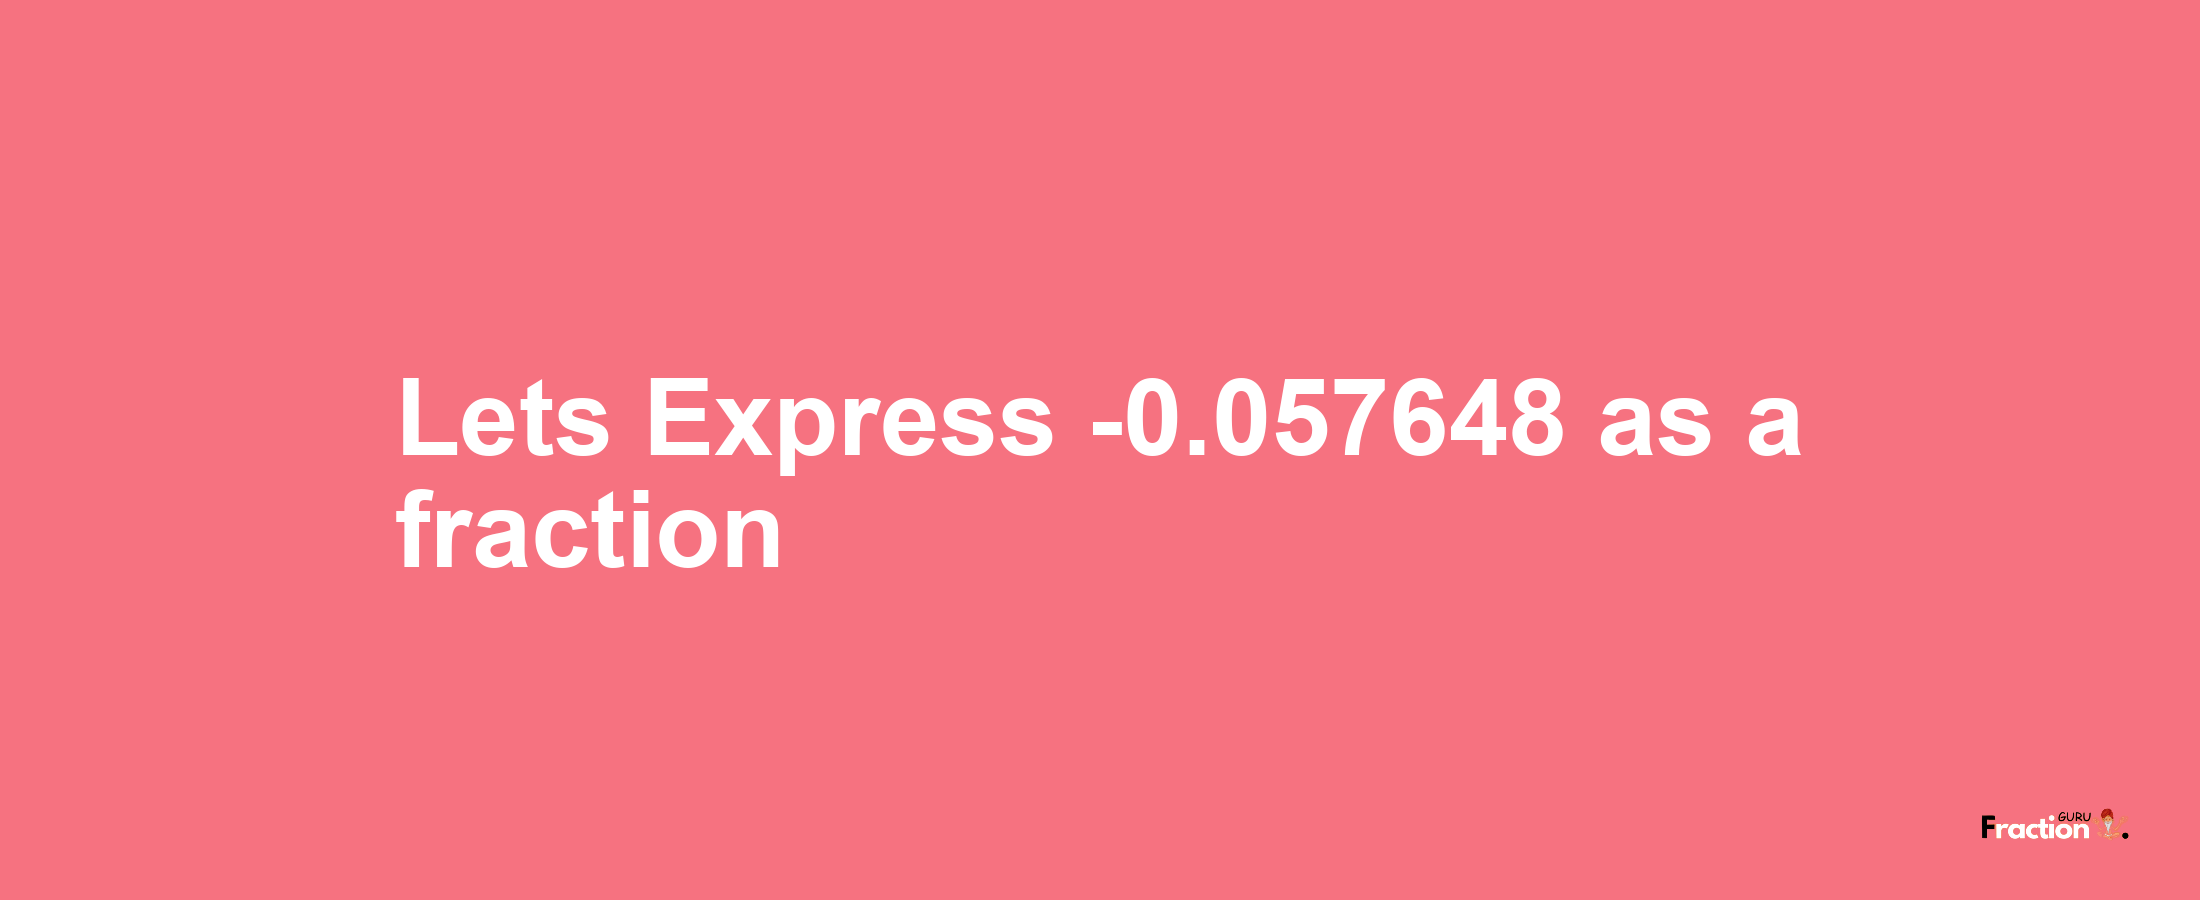 Lets Express -0.057648 as afraction